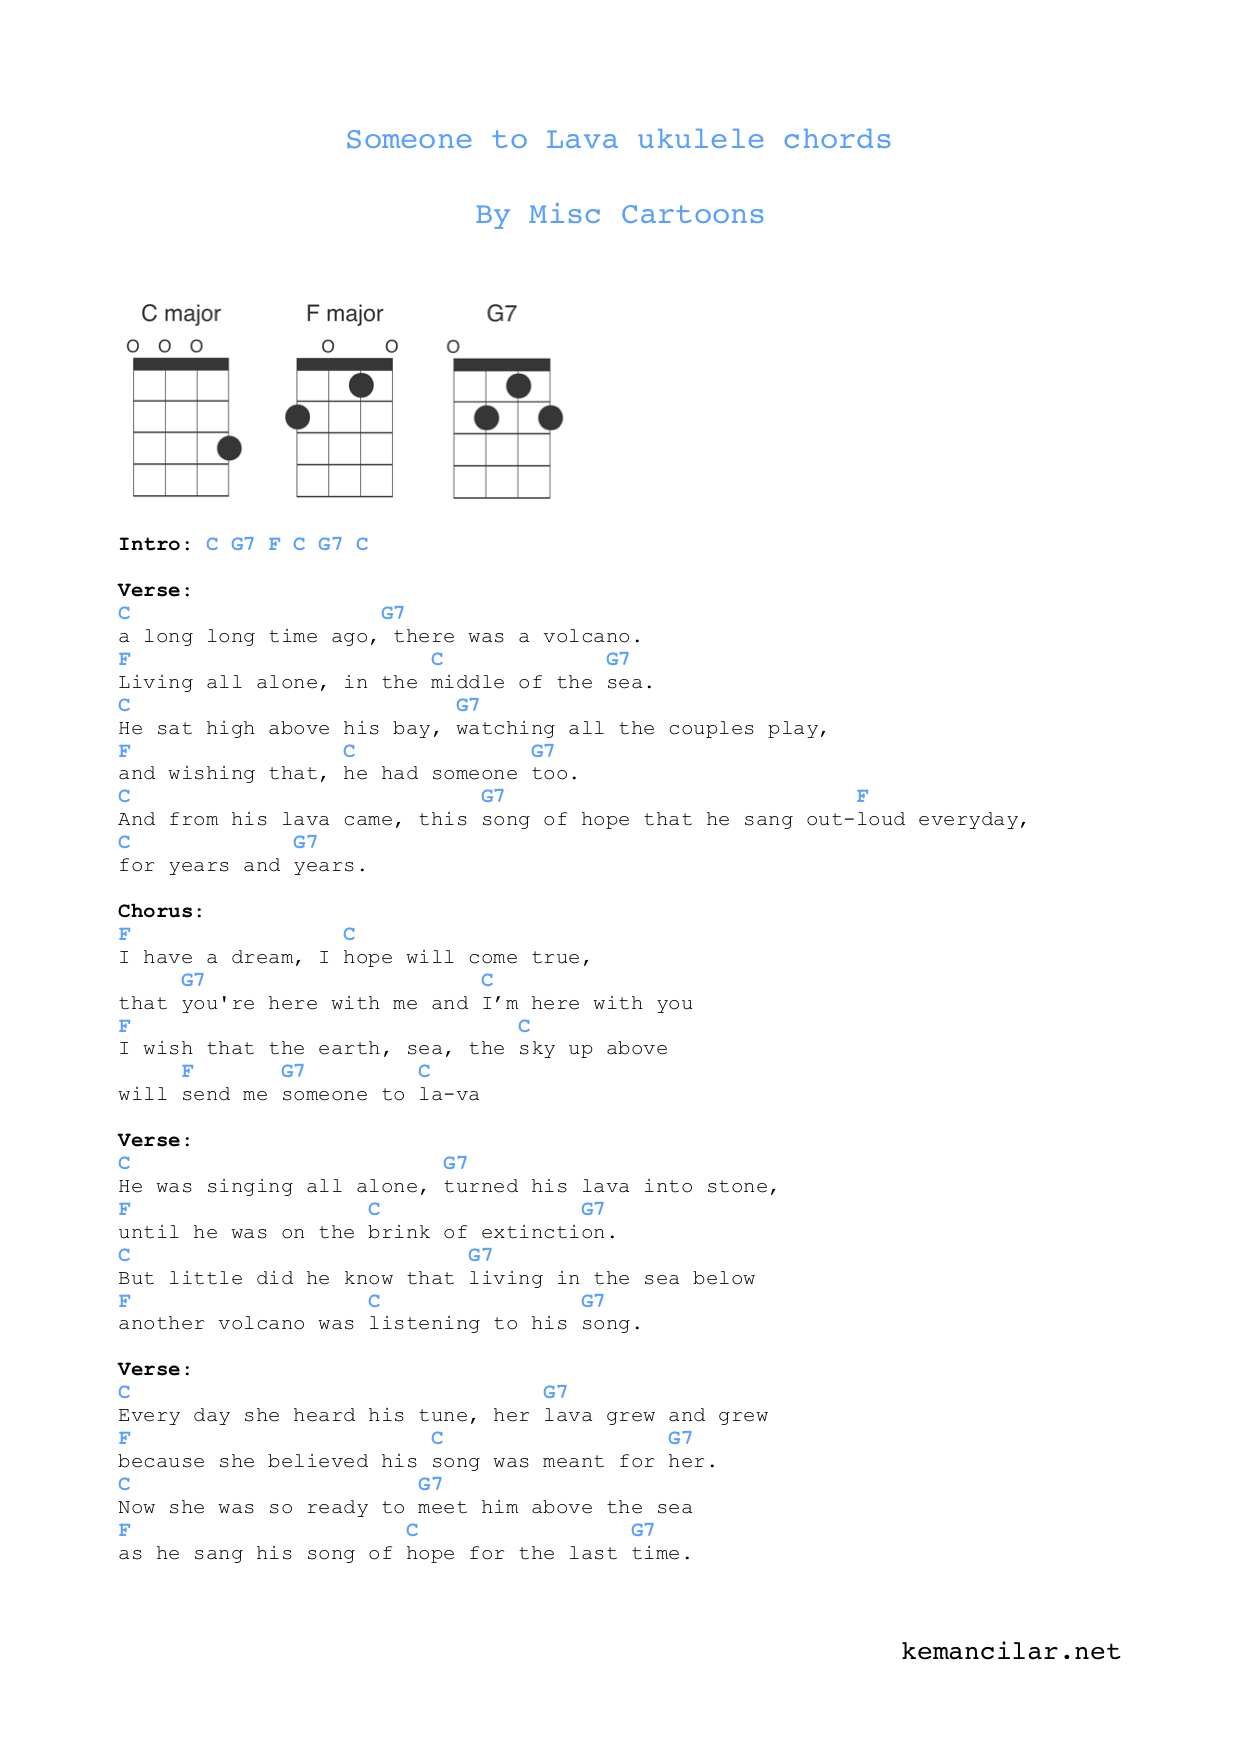 Someone To Lava Ukulele Chords Free Sheet Music Over 1000 songs you can learn to play! someone to lava ukulele chords free